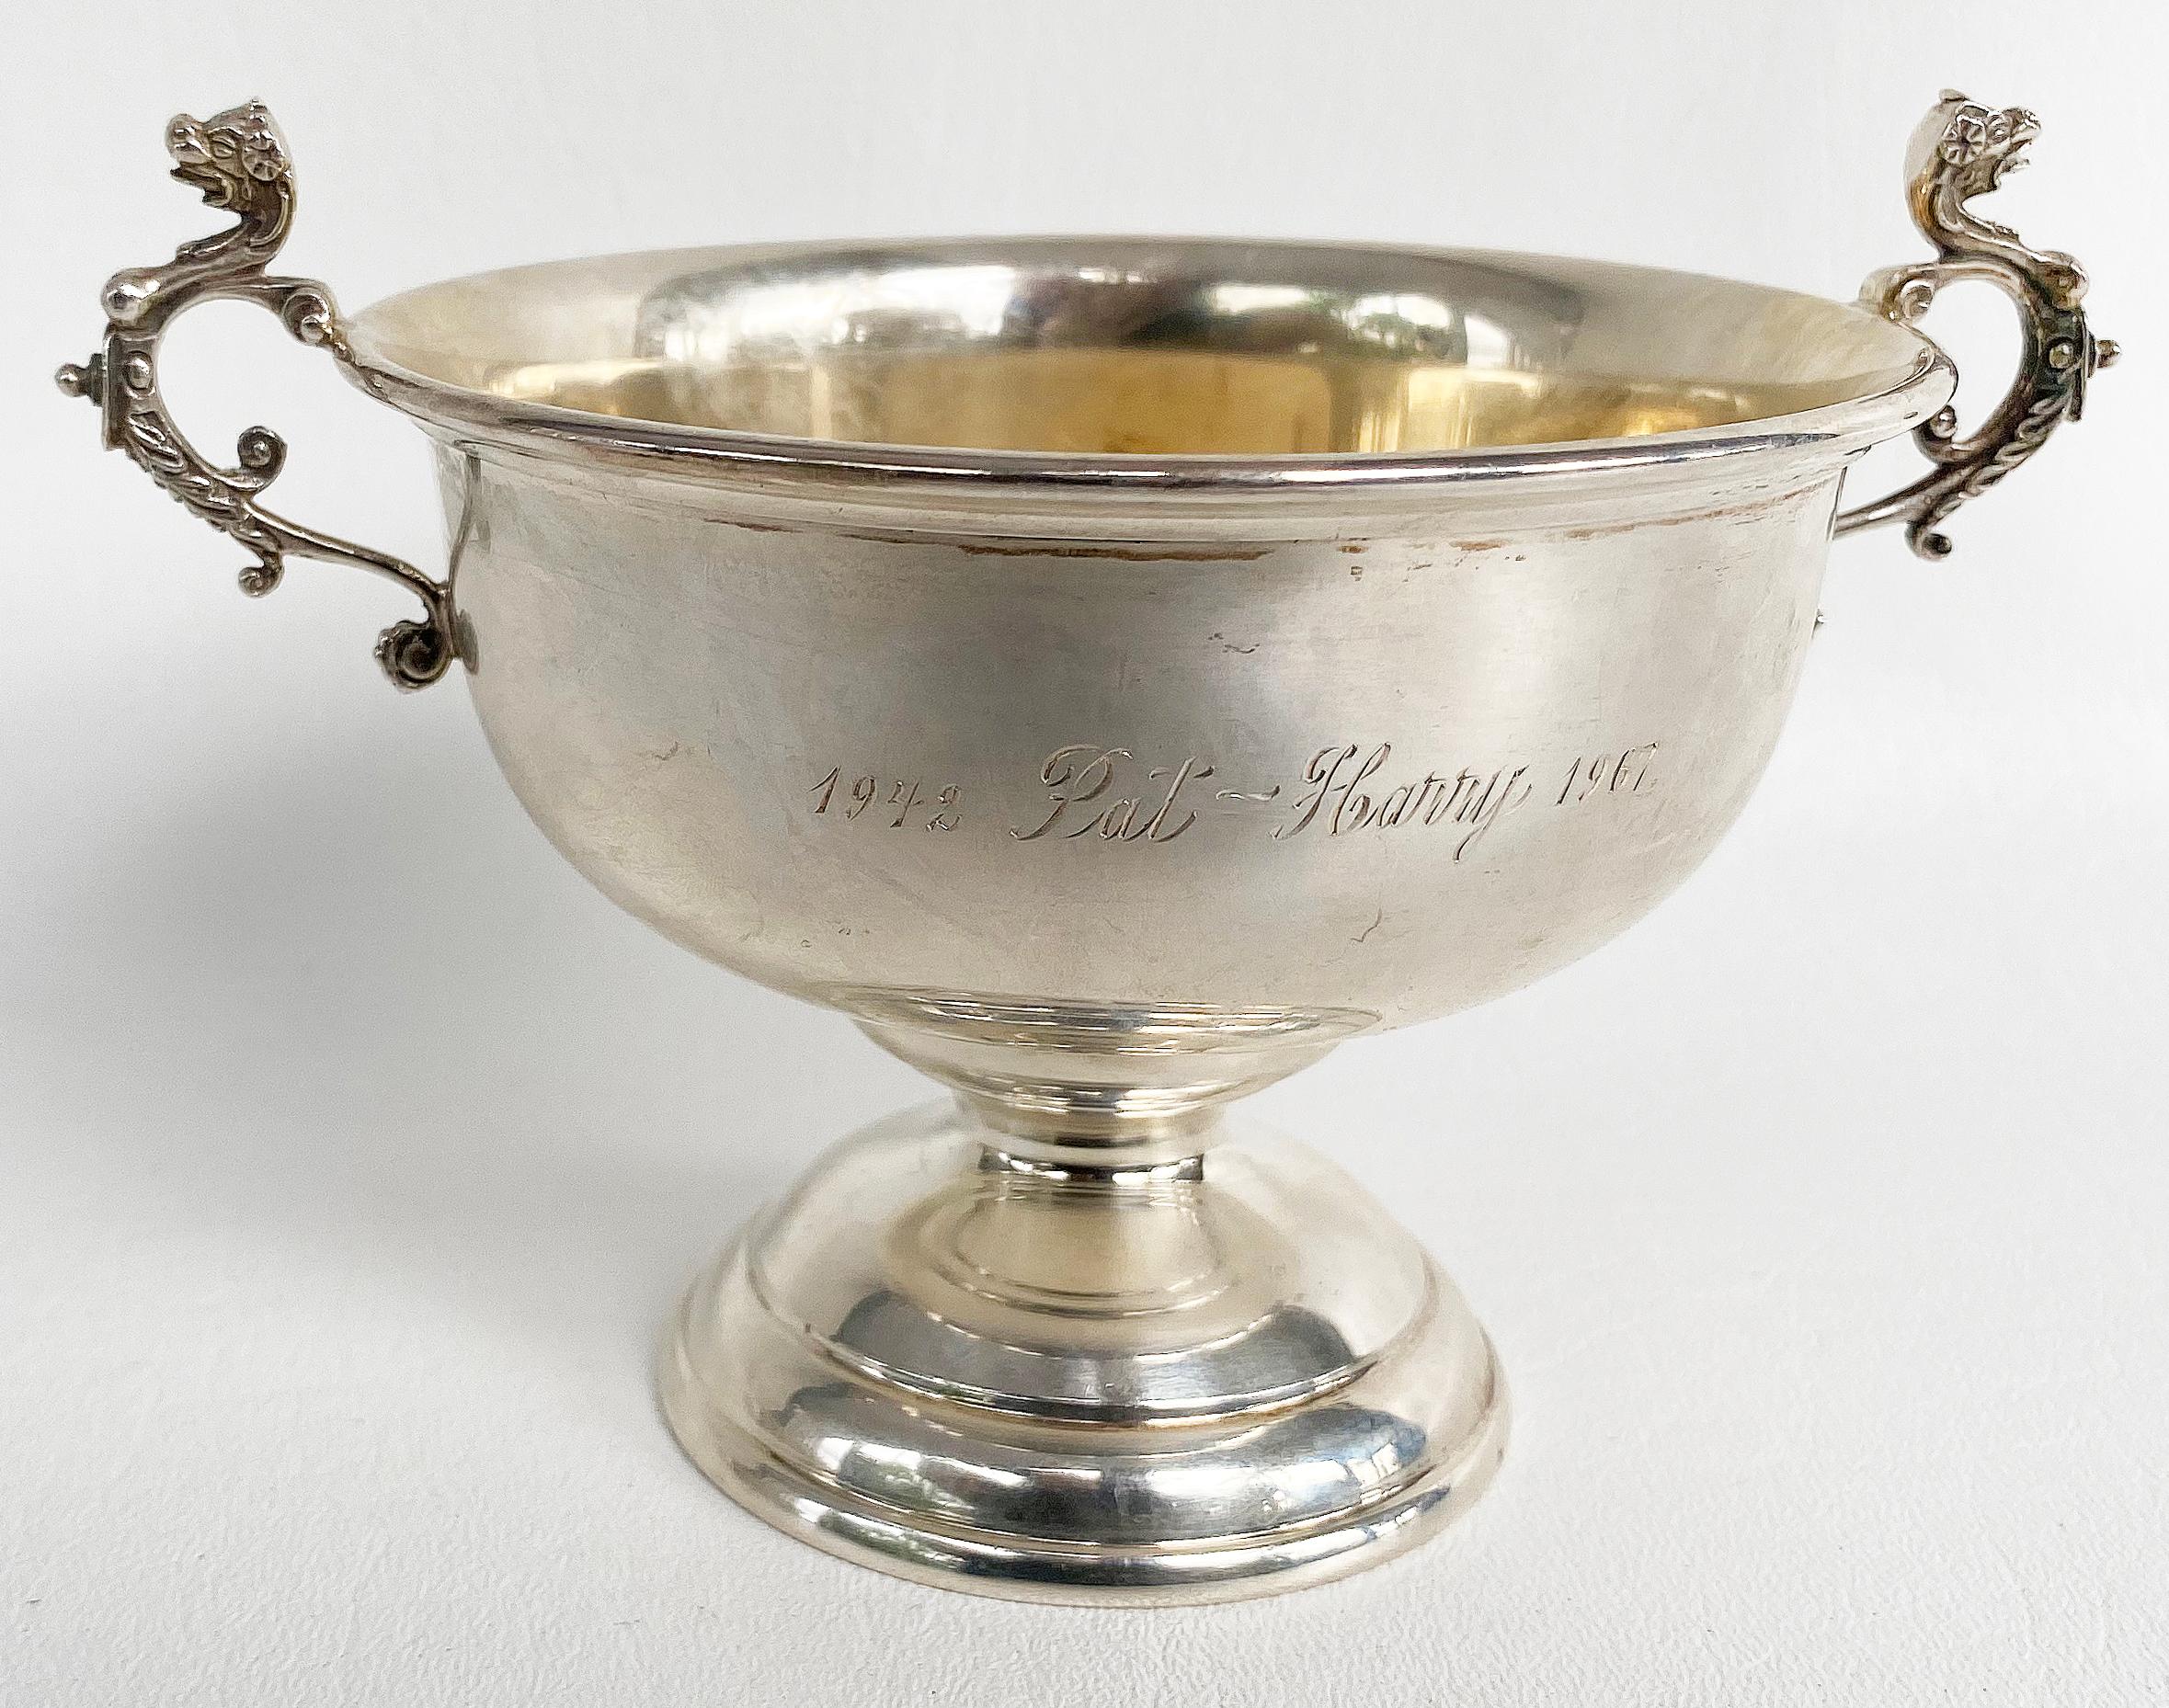 Reed & Barton Sterling Silver Engraved Anniversary cup trophy

Offered for sale is a 1967 engraved sterling silver handled anniversary loving cup trophy. The cup is marked under the base and the interior of the bowl has a gold wash. The cup is